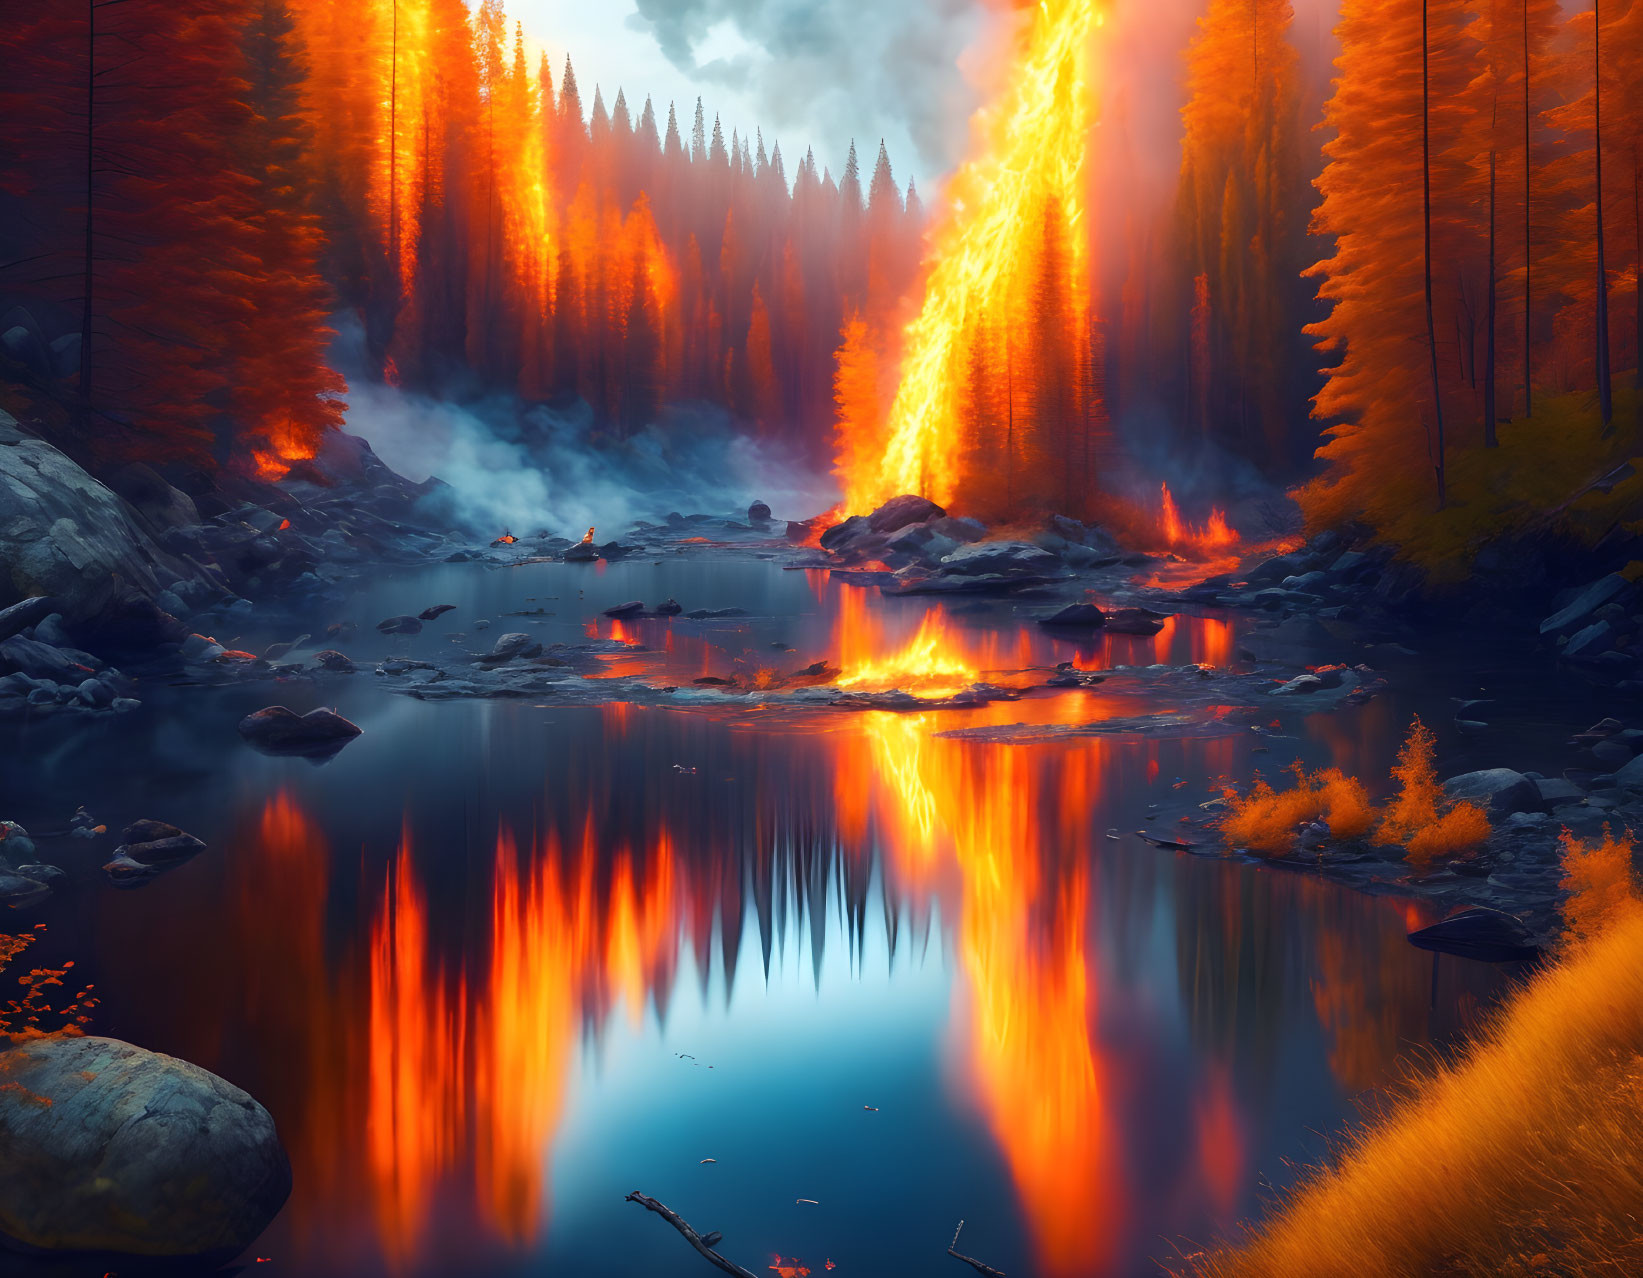 fire in forest